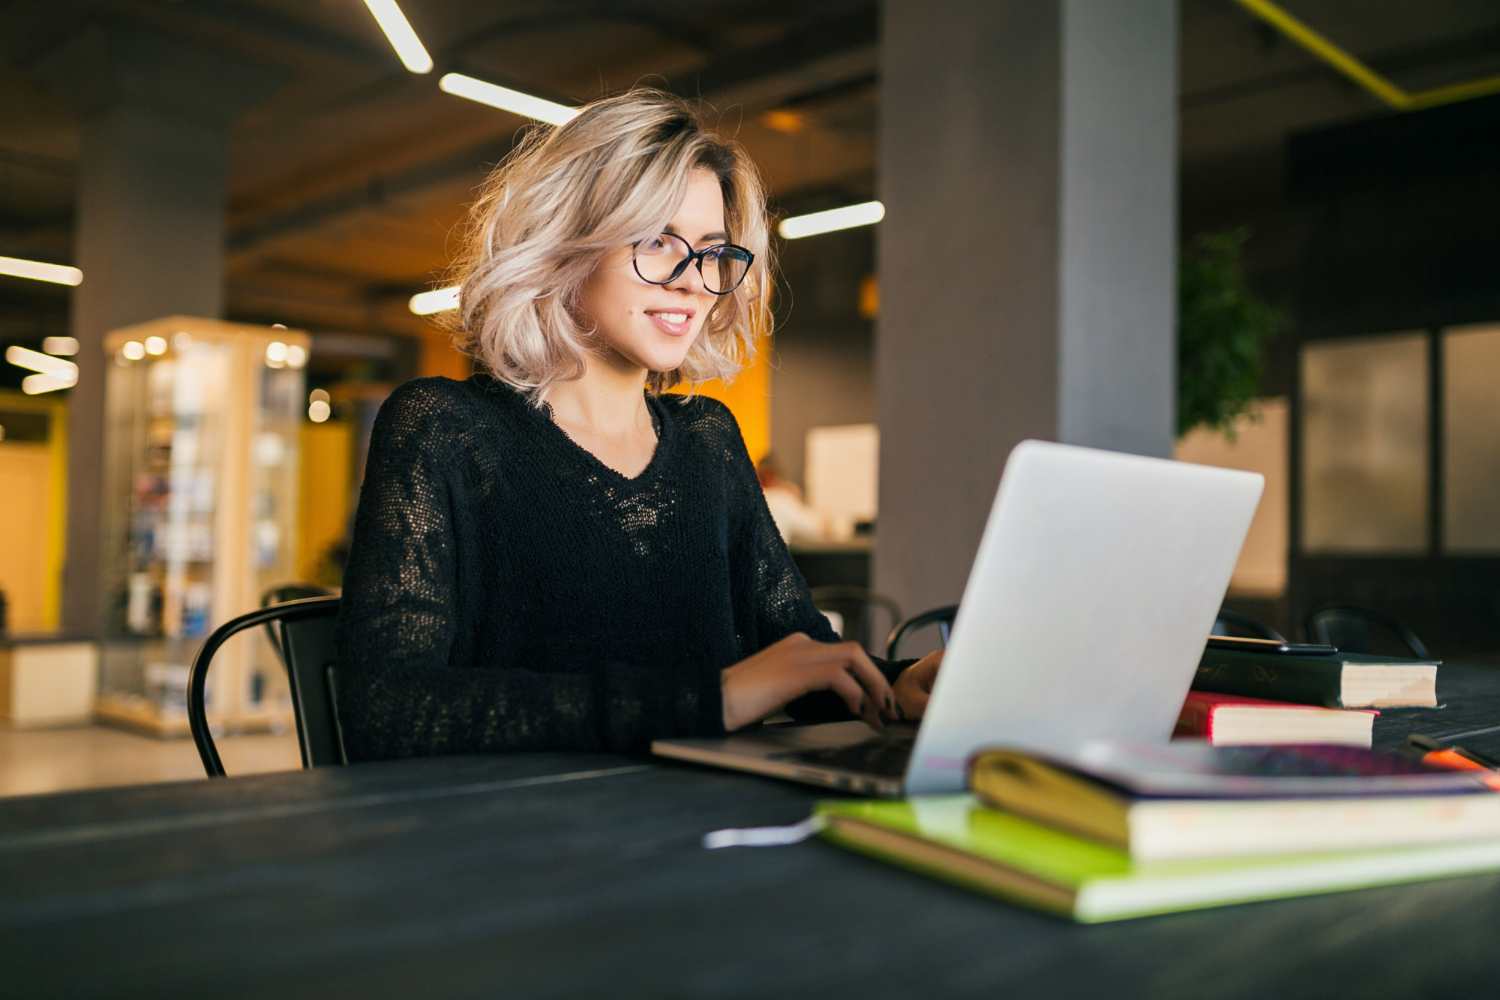 portrait-of-young-pretty-smiling-woman-sitting-at-table-in-black-shirt-working-on-laptop-in-co-working-office-wearing-glasses